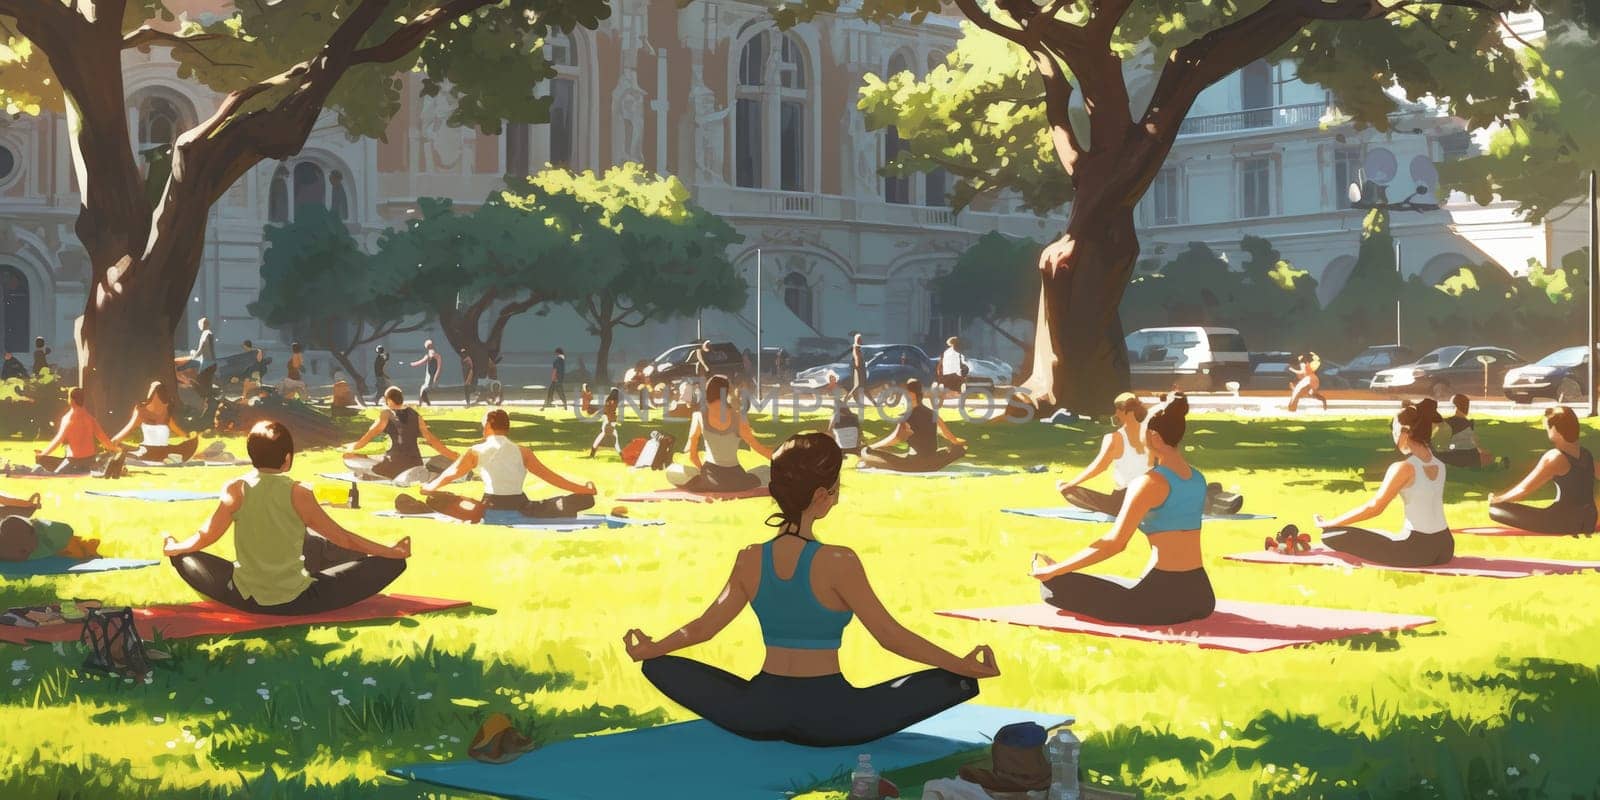 Group of adults attending a yoga class outside in park with natural background.